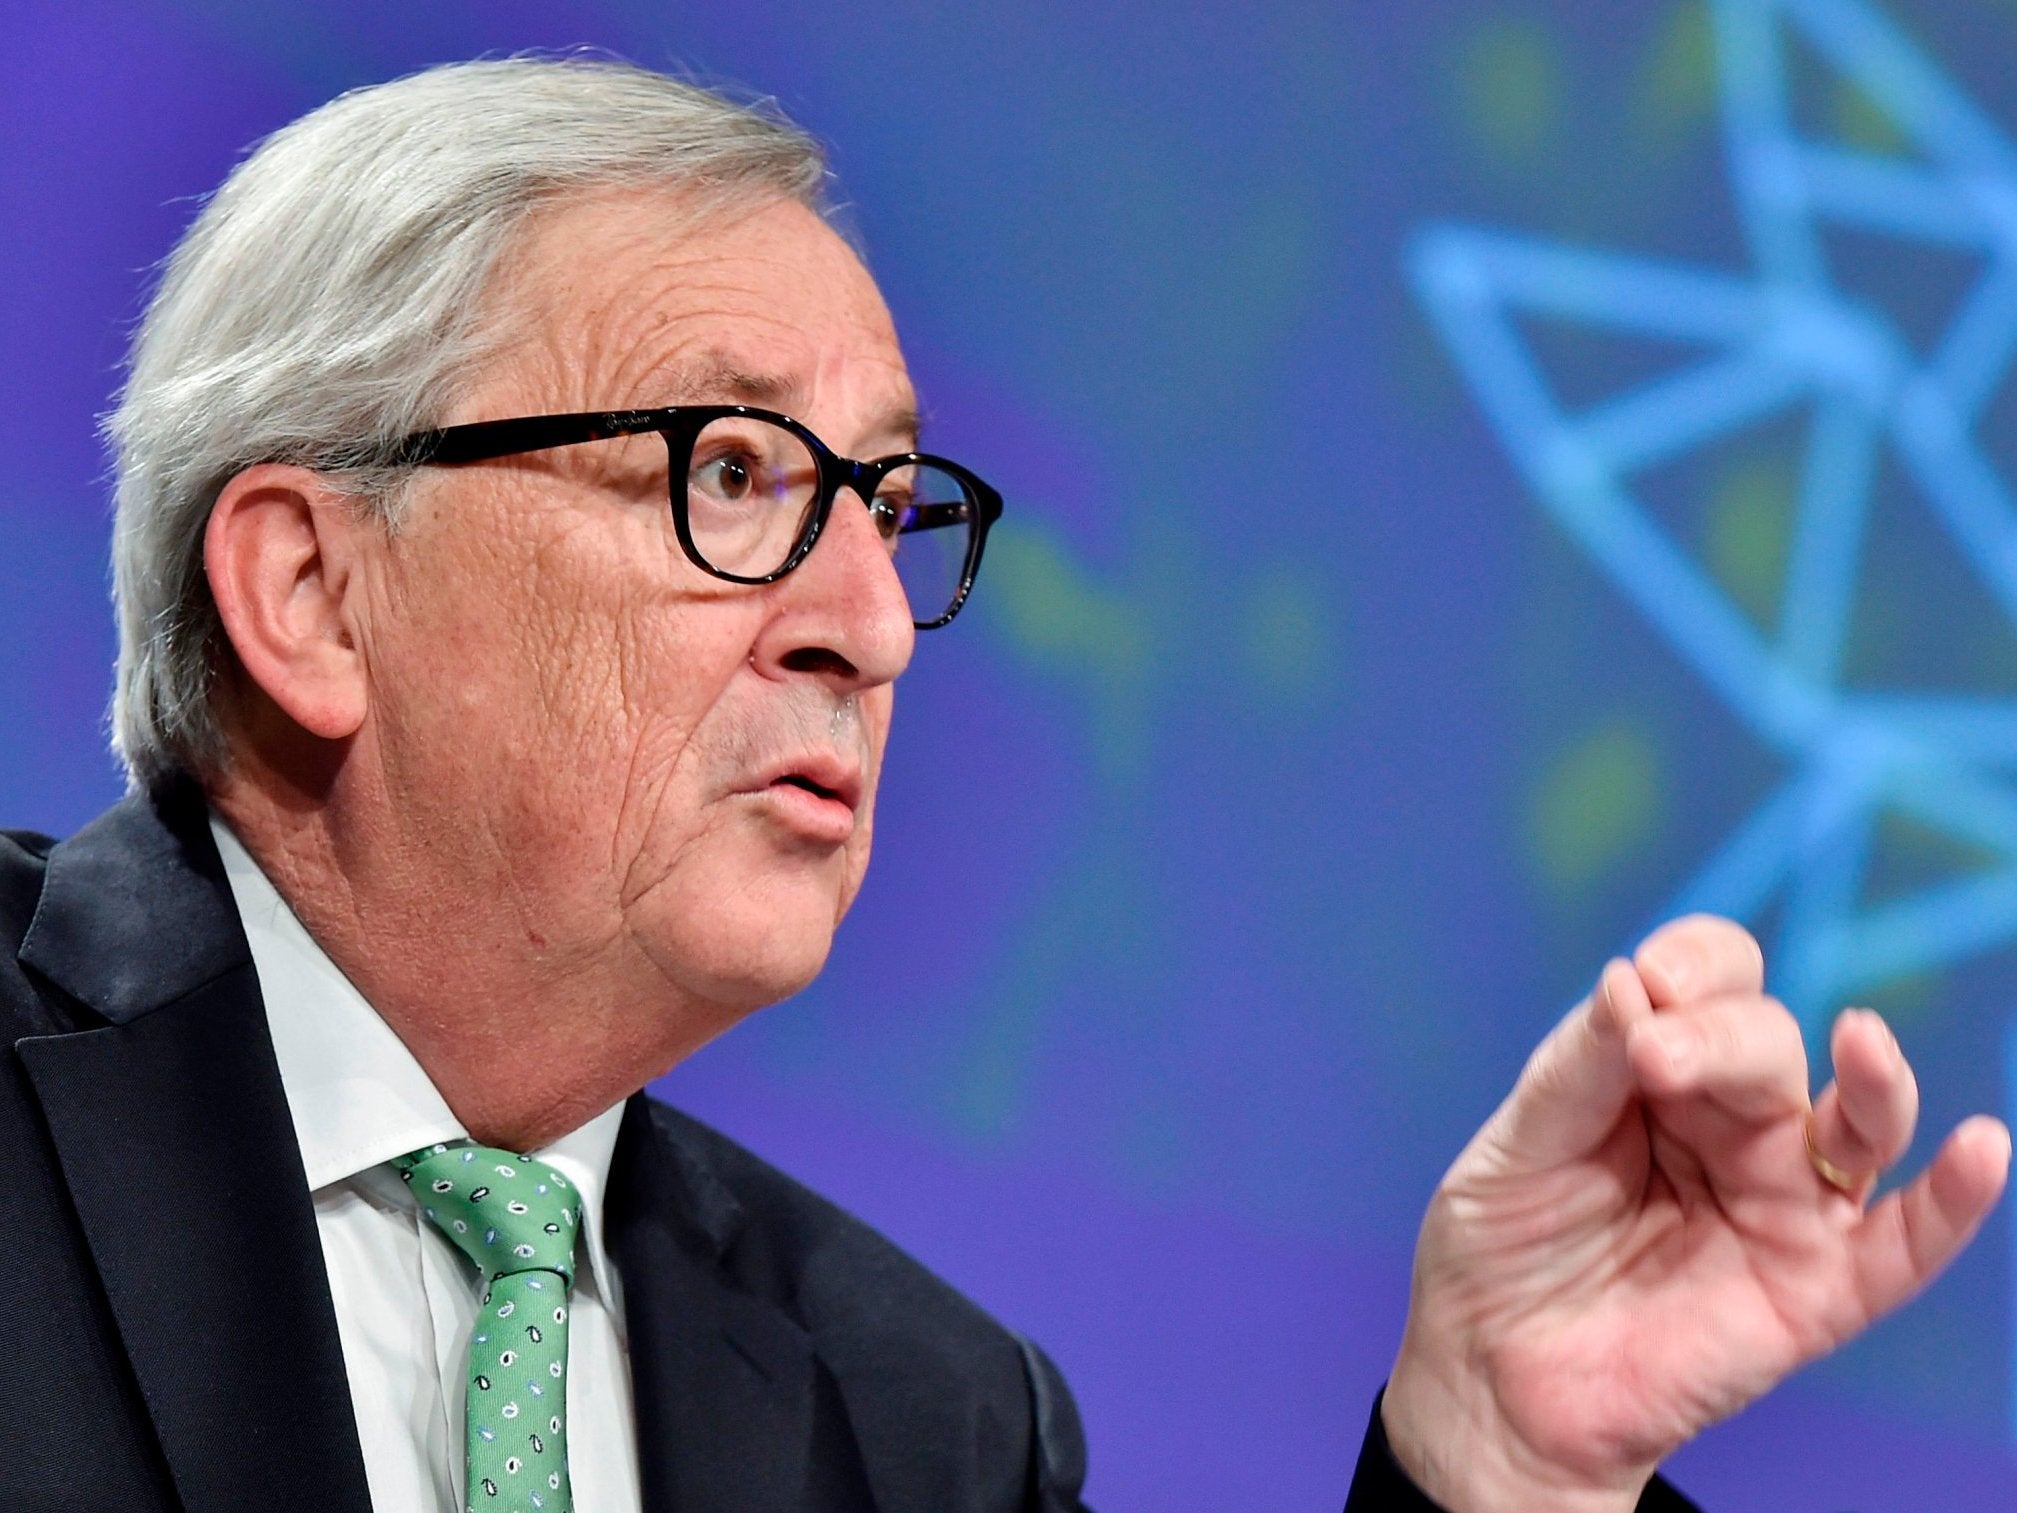 No-deal Brexit 'would lead to a collapse of the United Kingdom', EU president Jean-Claude Juncker says